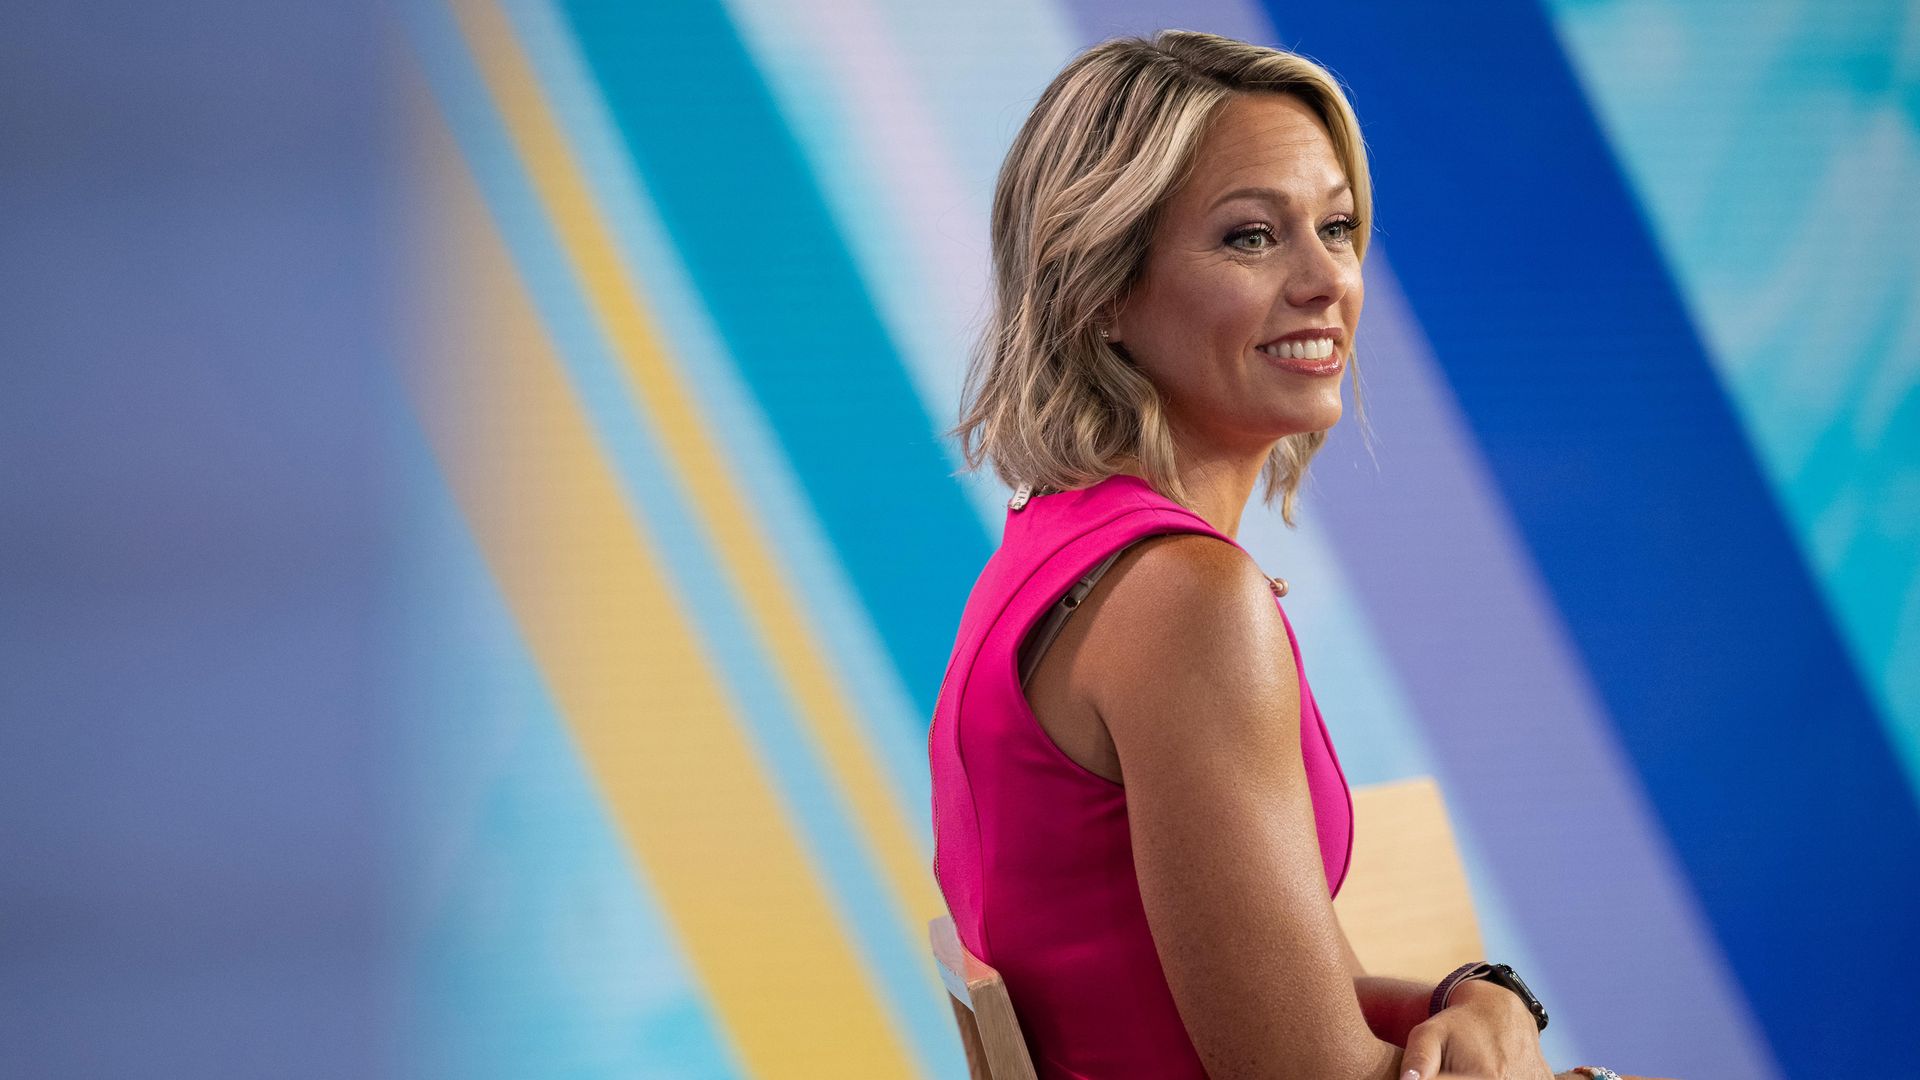 Dylan Dreyer in the NBC studios wearing a pink dress 